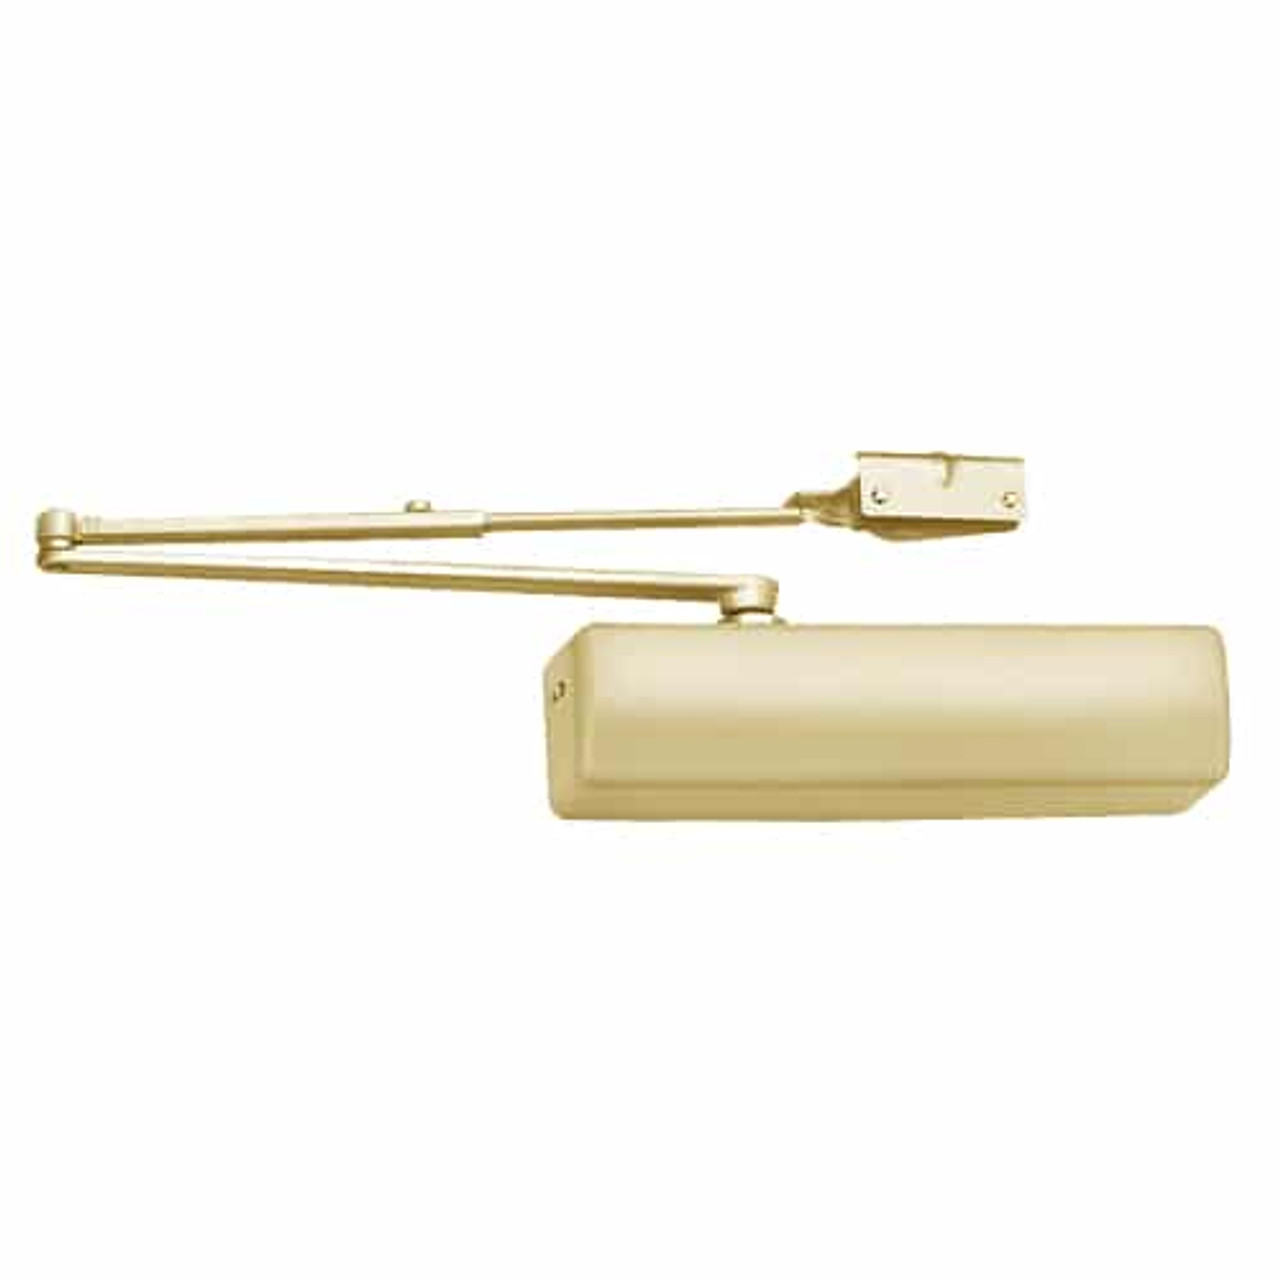 DC6210-A1-696 Corbin 6000 Series Multi-Sized Parallel Arm Door Closers with Hold Open Arm in Satin Brass Finish